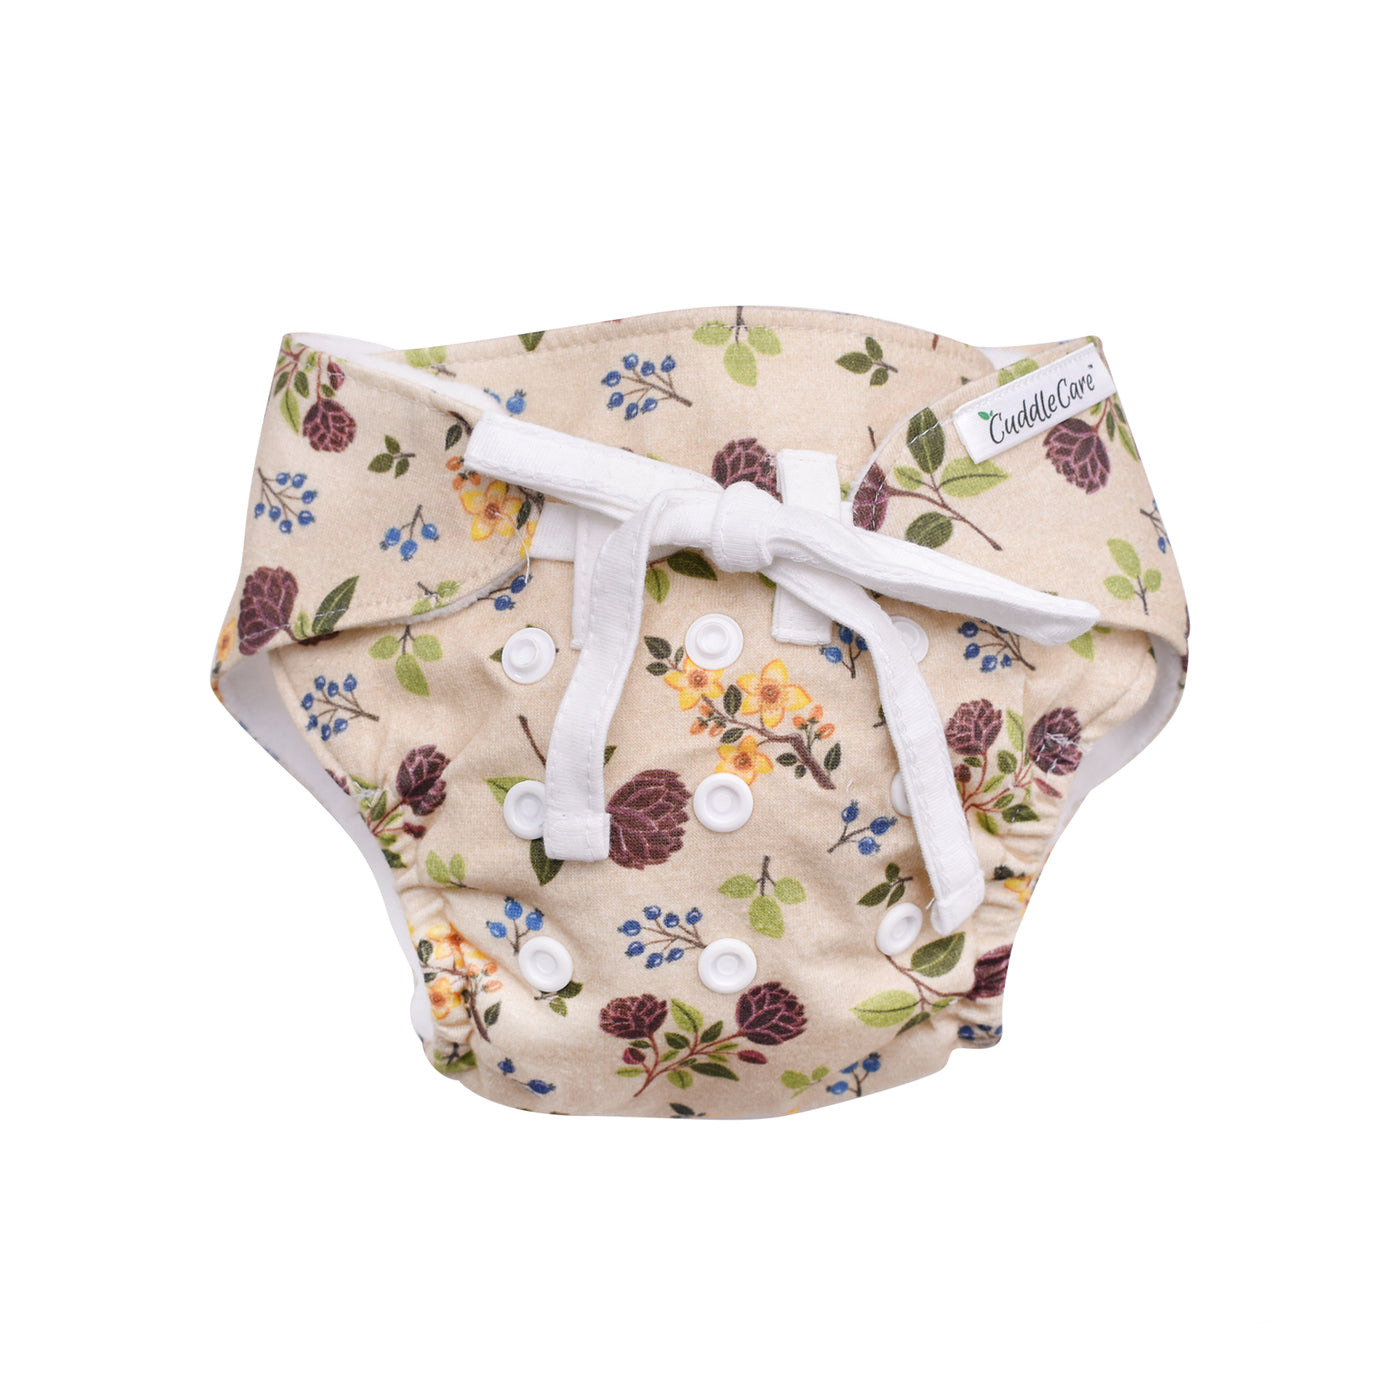 Duo New Born Cloth Diaper Wildflower with Insert